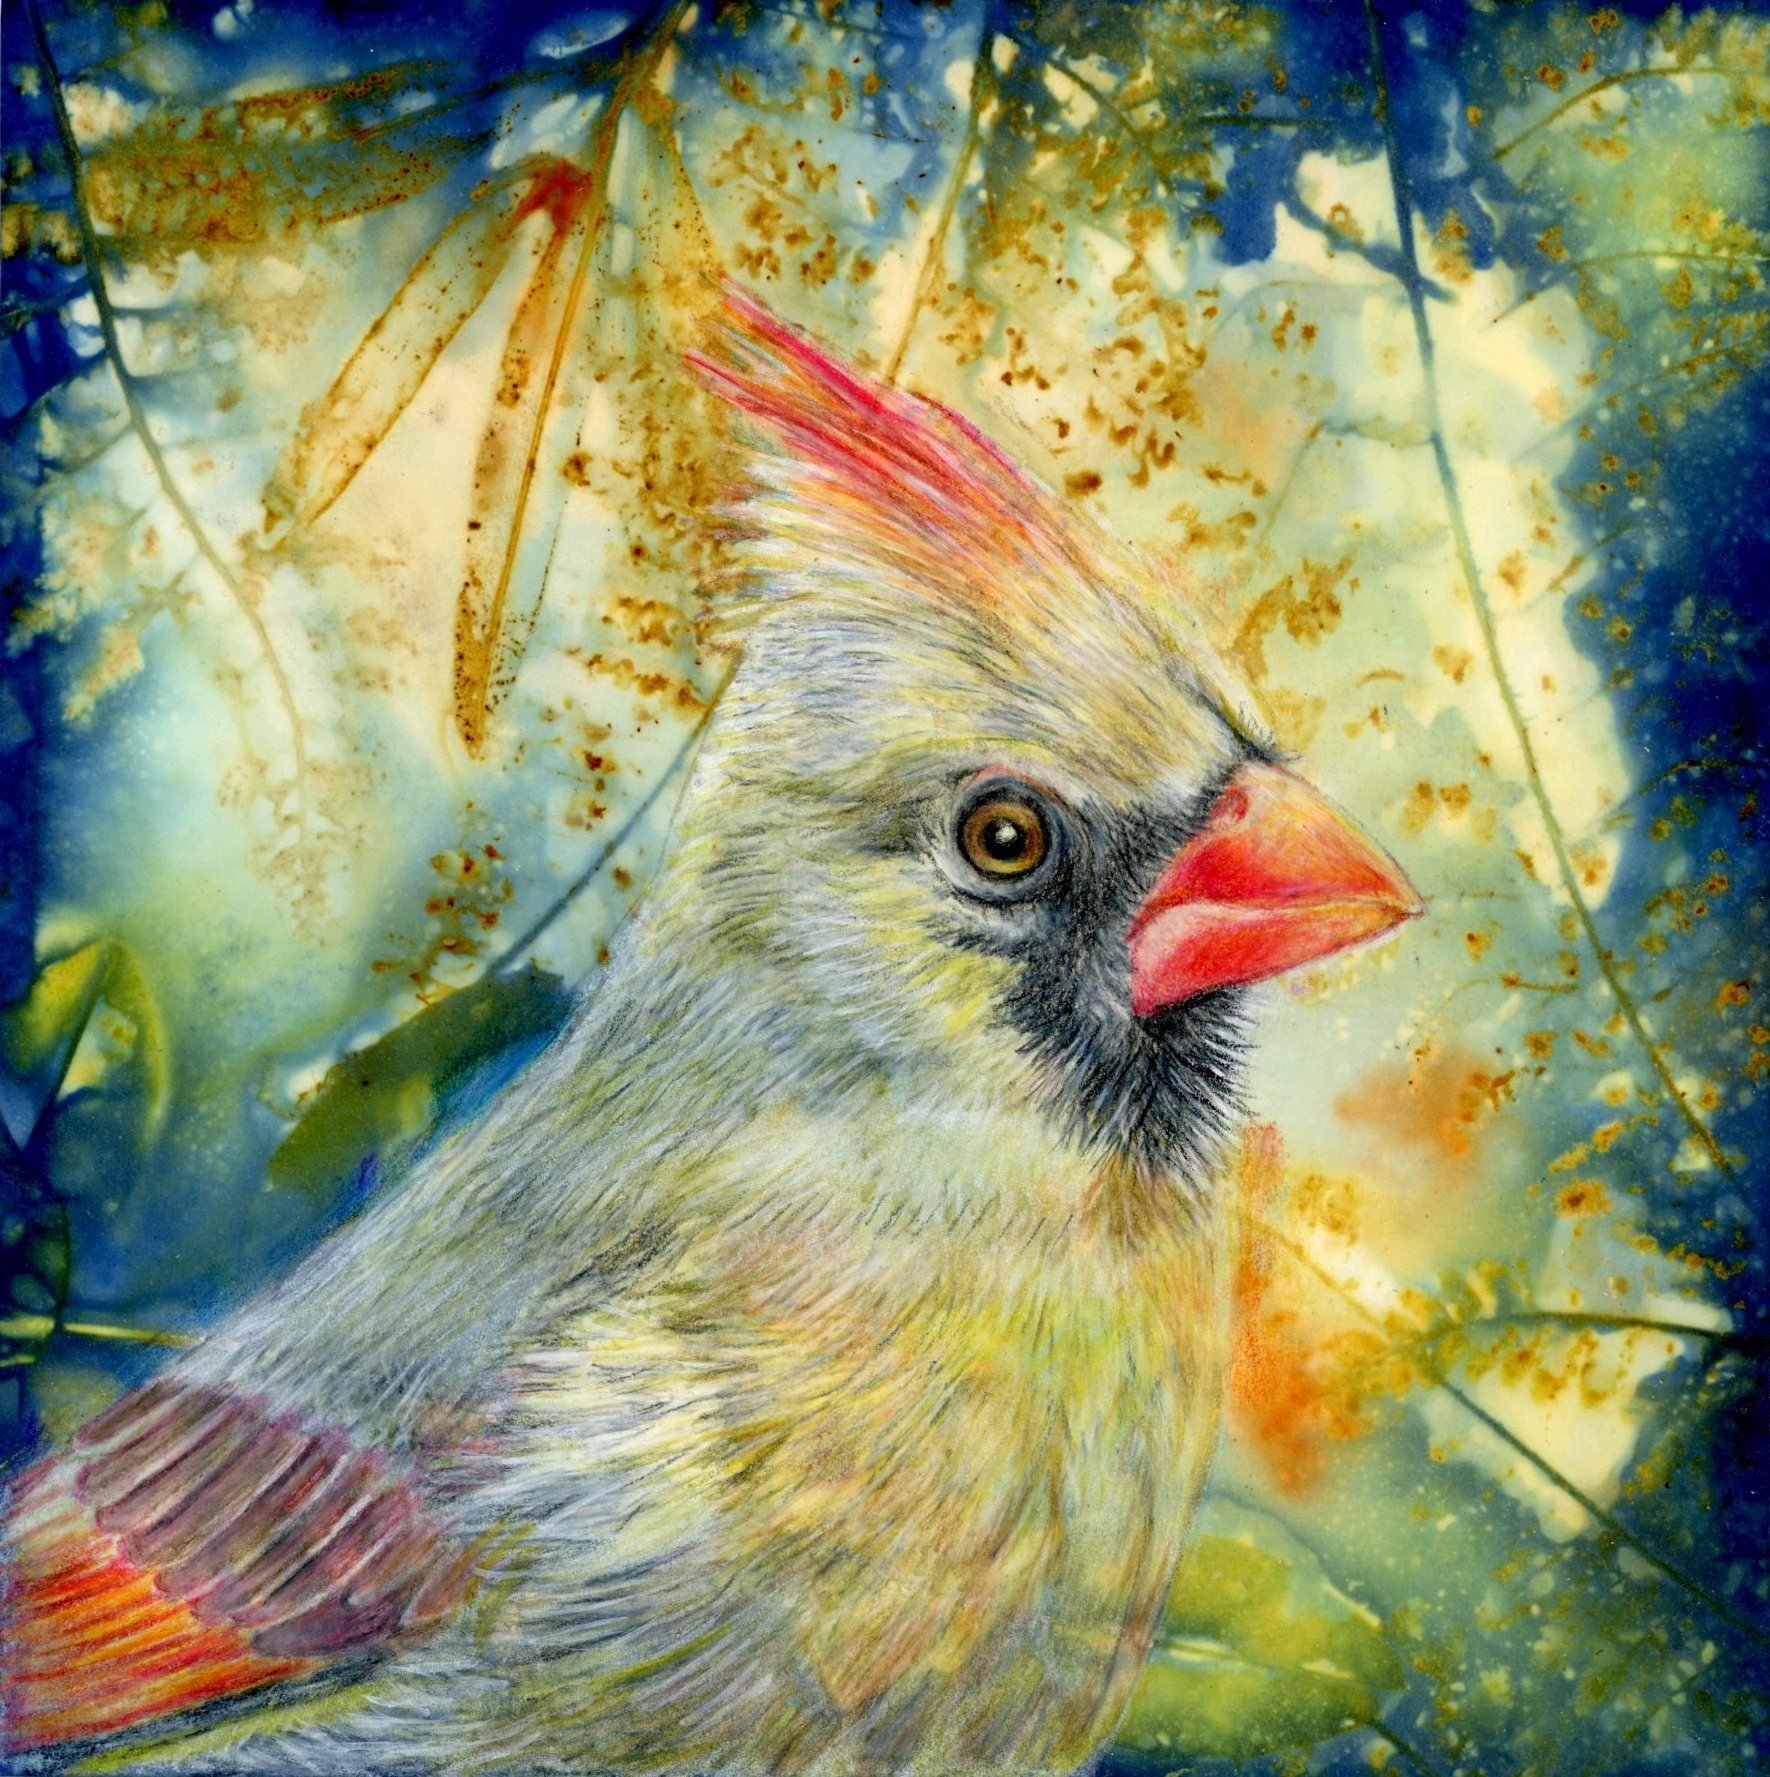 &lt;p&gt;&lt;strong&gt;SUZETTE DURSO&lt;/strong&gt;eco printmaking with colored pencil drawing&lt;a href="/suzette-durso-limp2023"&gt;More →&lt;/a&gt;&lt;/p&gt;